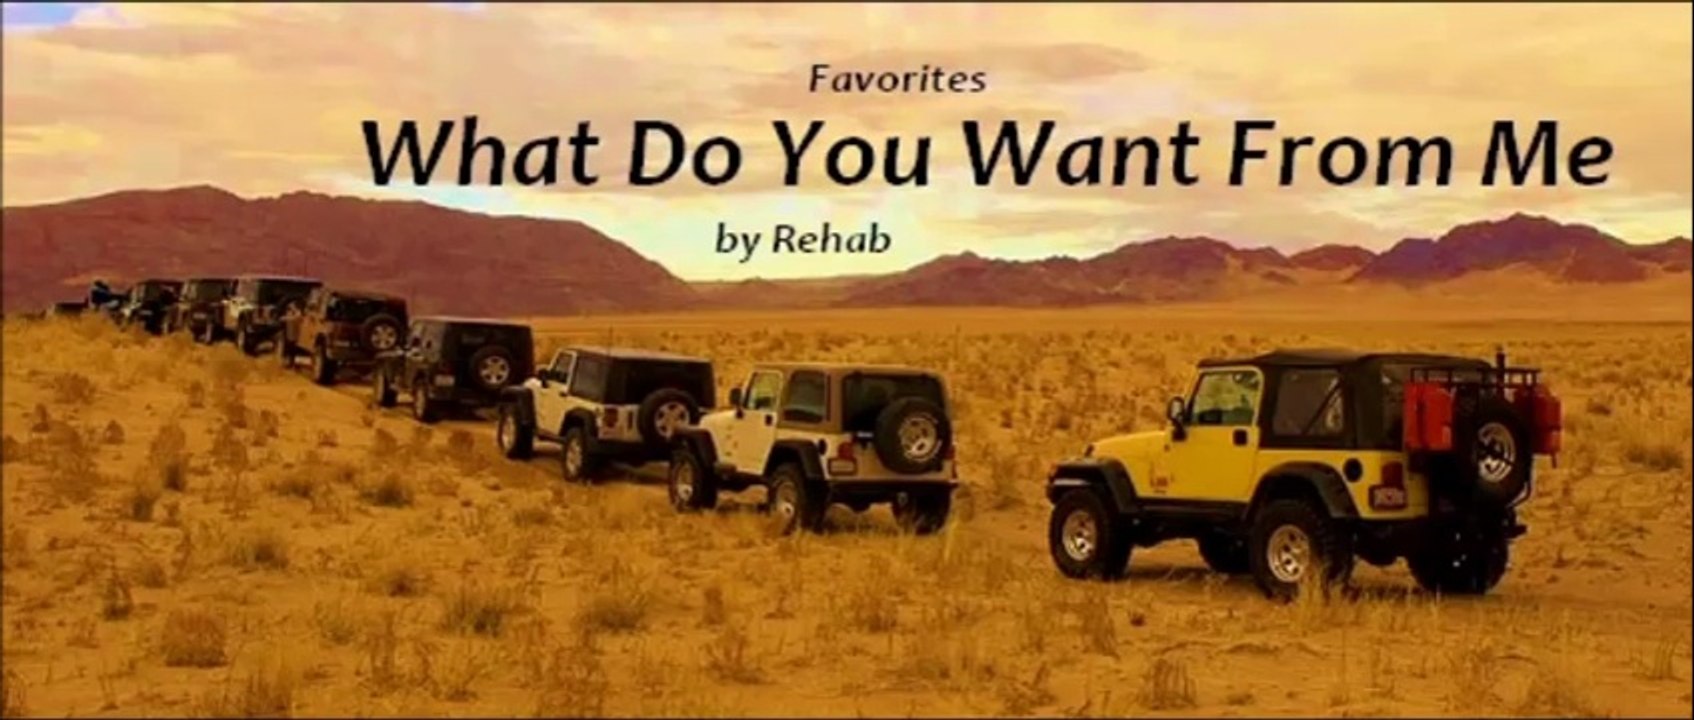 What Do You Want From Me by Rehab (Favorites)